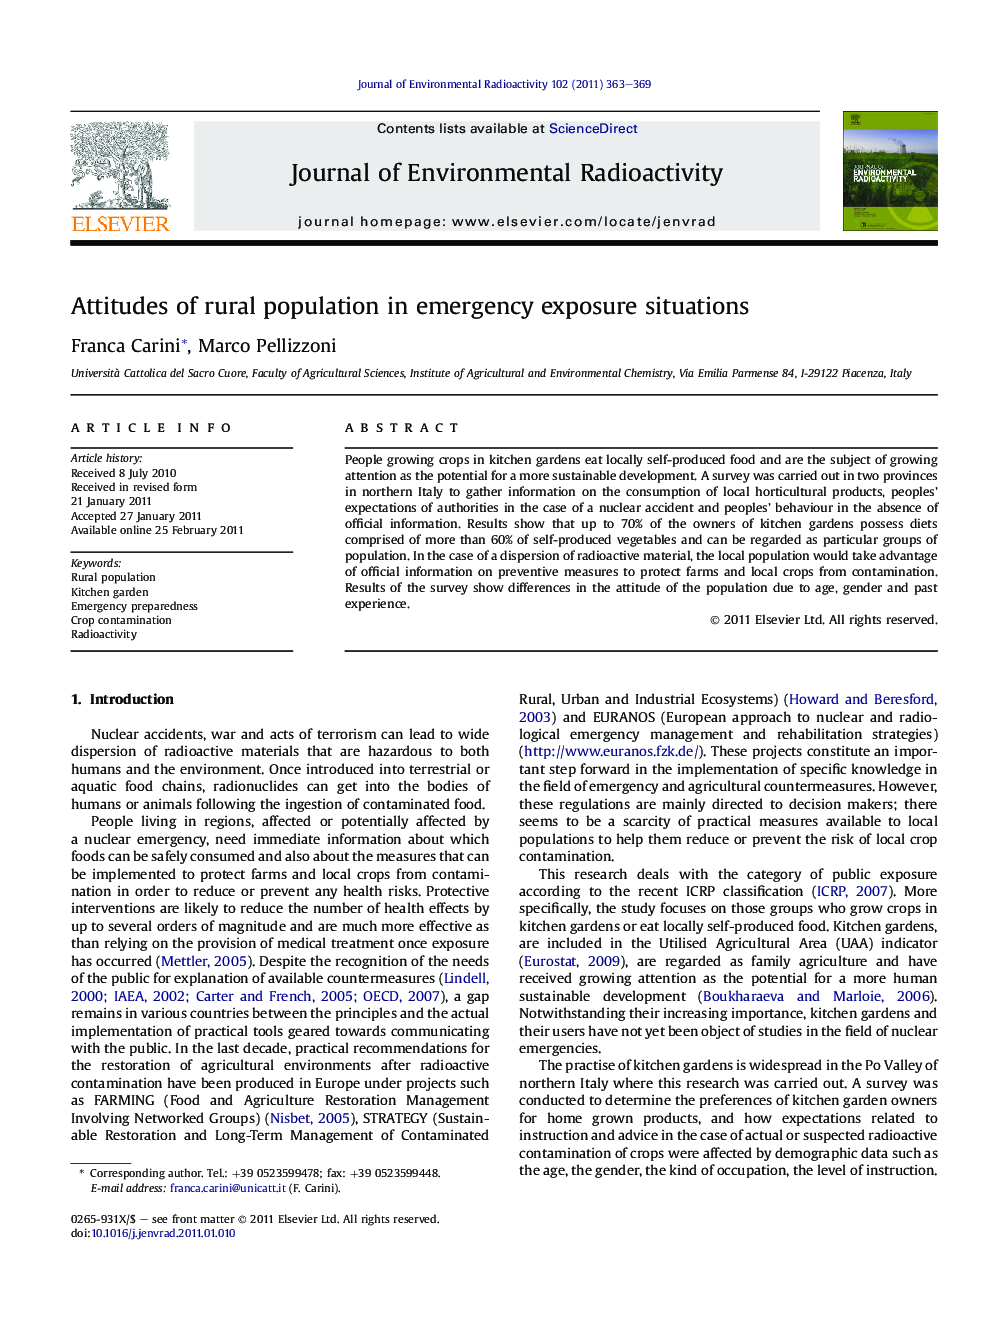 Attitudes of rural population in emergency exposure situations